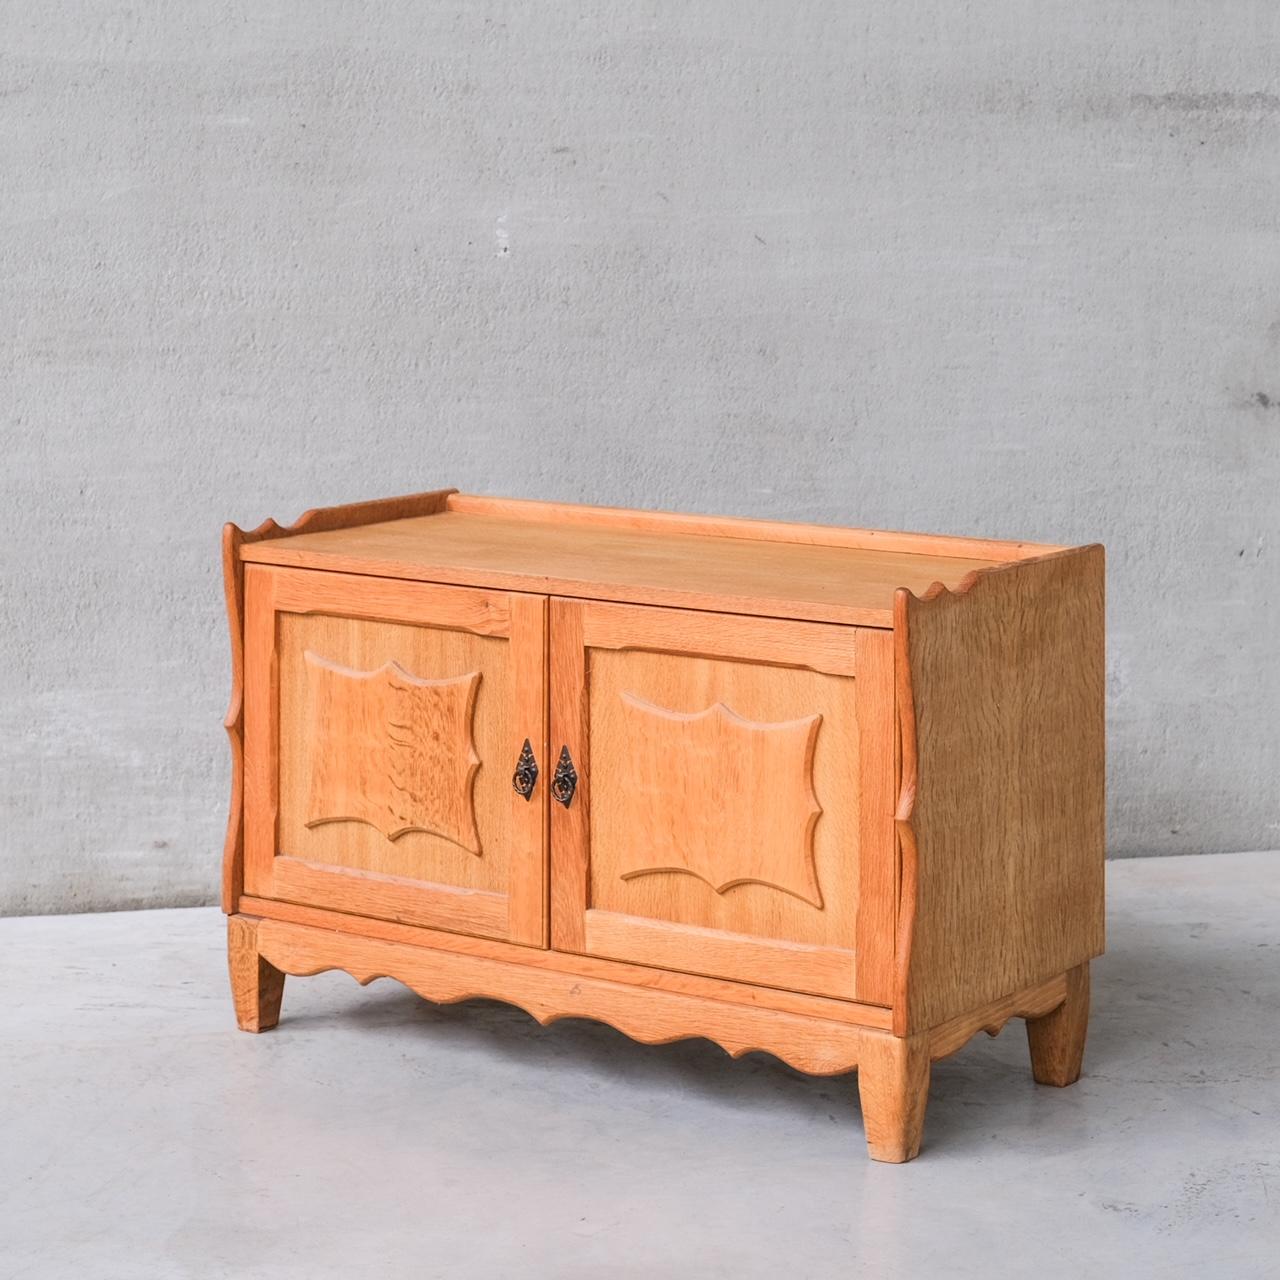 A pair of blonde oak bedside cabinets or small sideboards.

Denmark, c1960s.

Attr. to Henning Kjaernulf.

Price is for the pair.

Good vintage condition, some scuffs and wear commensurate with age.

Internal ref: 18/10/23/038.

Location: Belgium